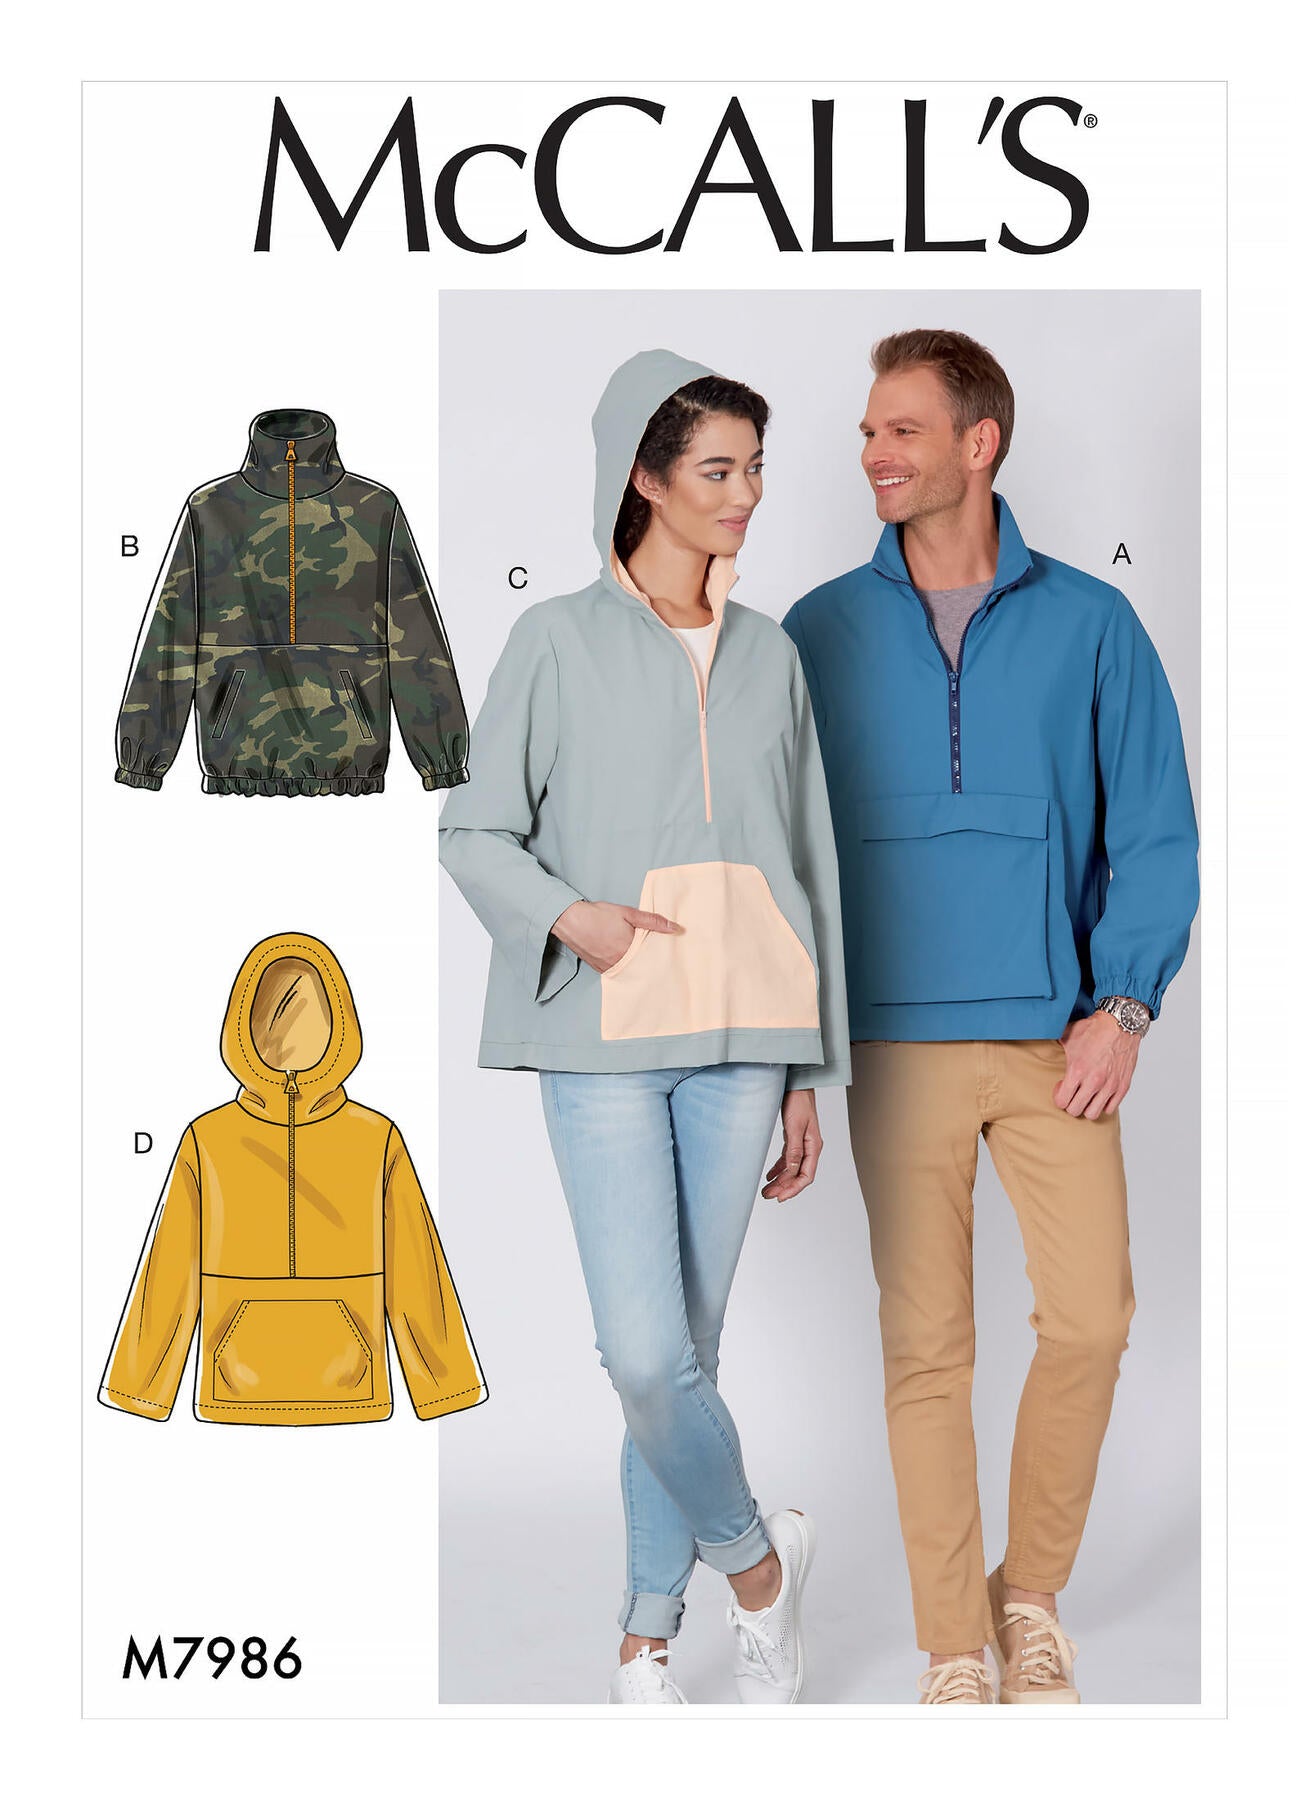 A B, C, D Loose fitting jackets with self lined collar or contrast lined hood have exposed zipper, pocket and sleeve variations, stitched hem or elastic casing. A: Cargo pocket and elastic sleeve casing. B: Welt pockets and elastic sleeve casing. C: Contrast hood lining and pocket. D: Self lined hood.